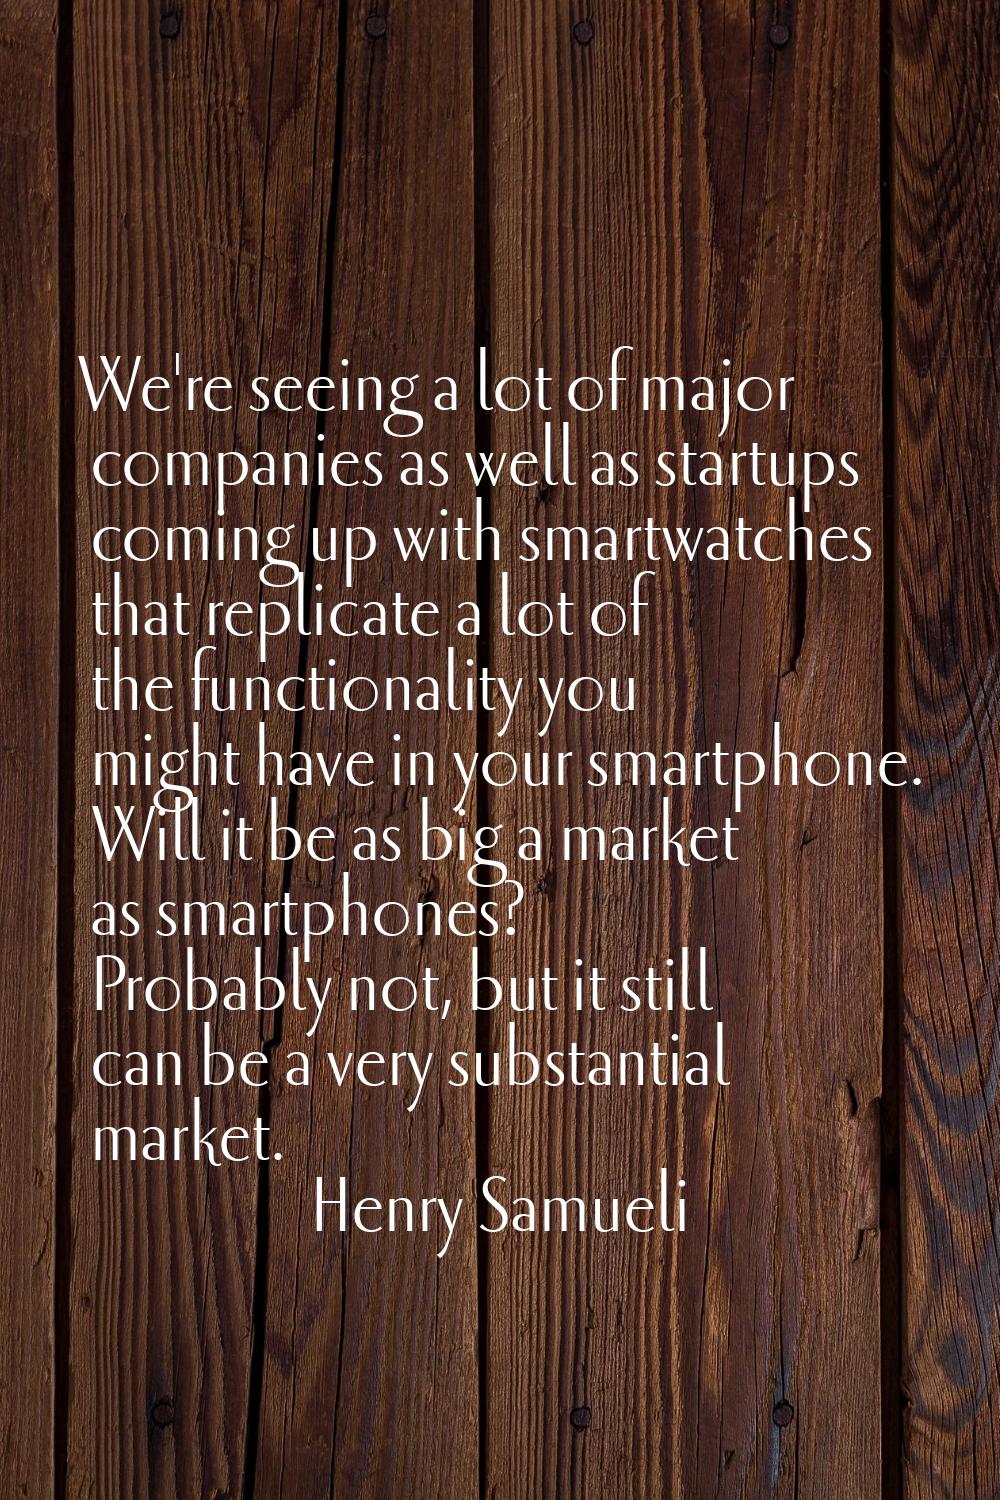 We're seeing a lot of major companies as well as startups coming up with smartwatches that replicat